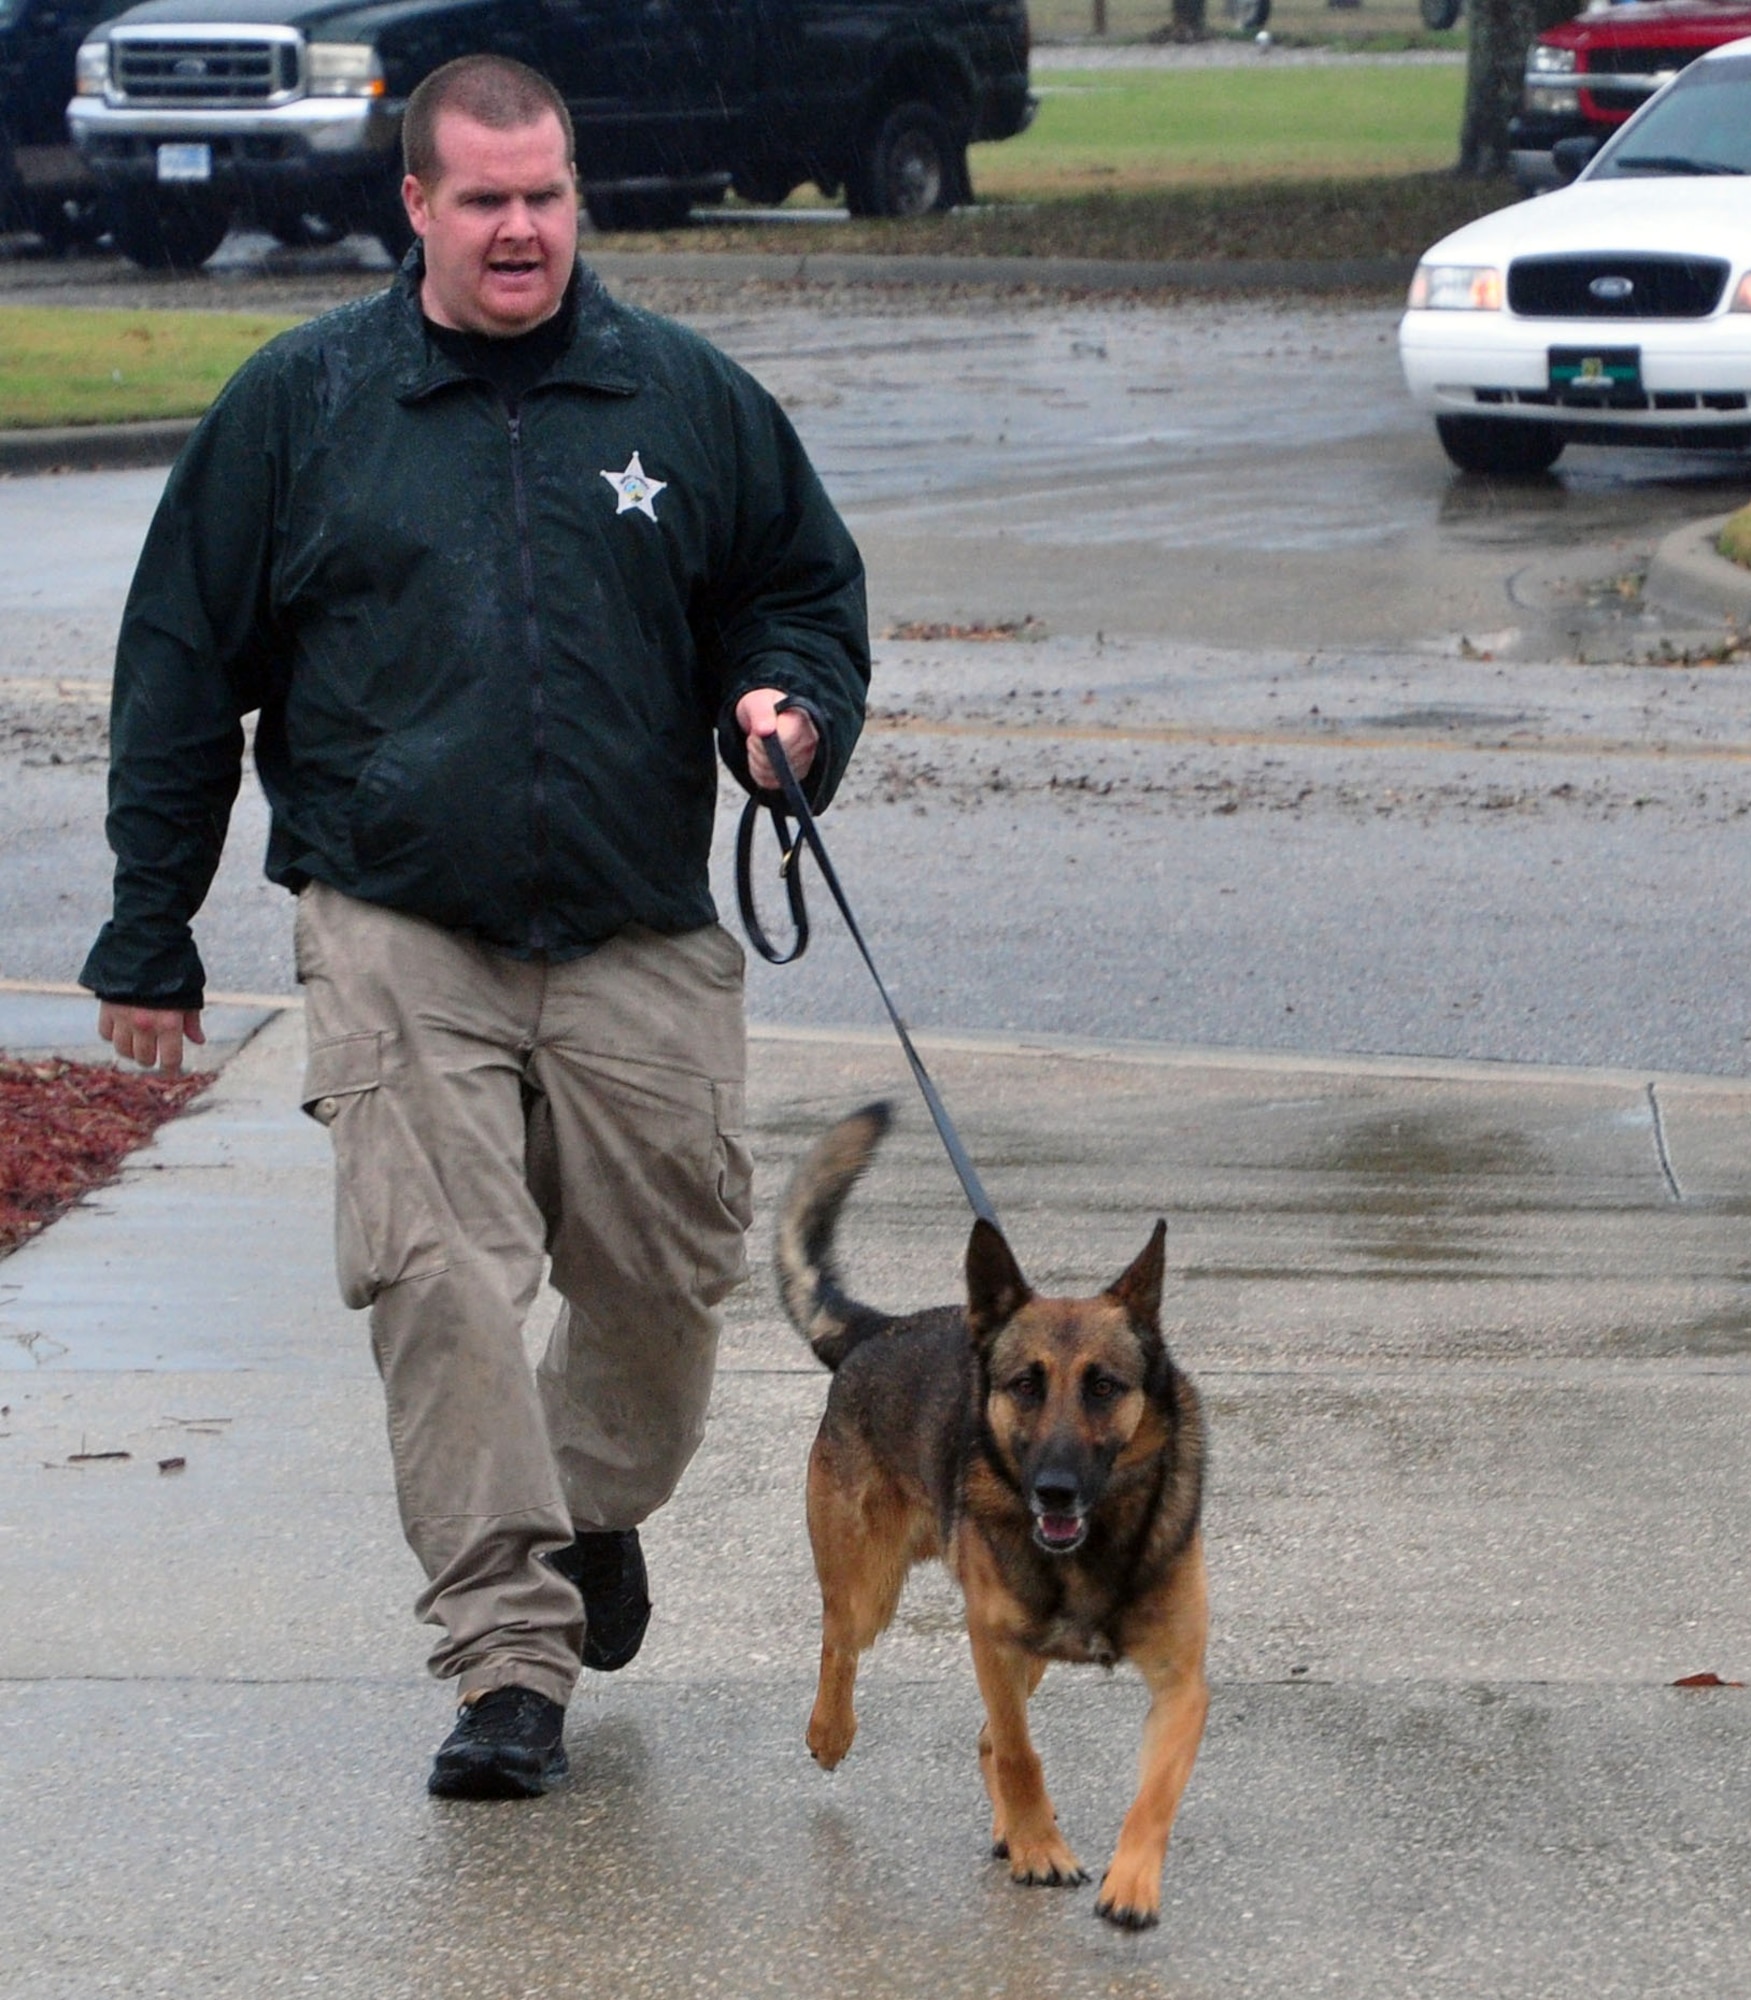 Andrew Longo, Washington County Sheriff’s Office deputy, leads Risko, his canine companion, into the Tyndall base chapel Feb. 7 as part of a narcotics working dog seminar attended by local and base authorities. (U.S. Air Force photo by Airman 1st Class Alex Echols)